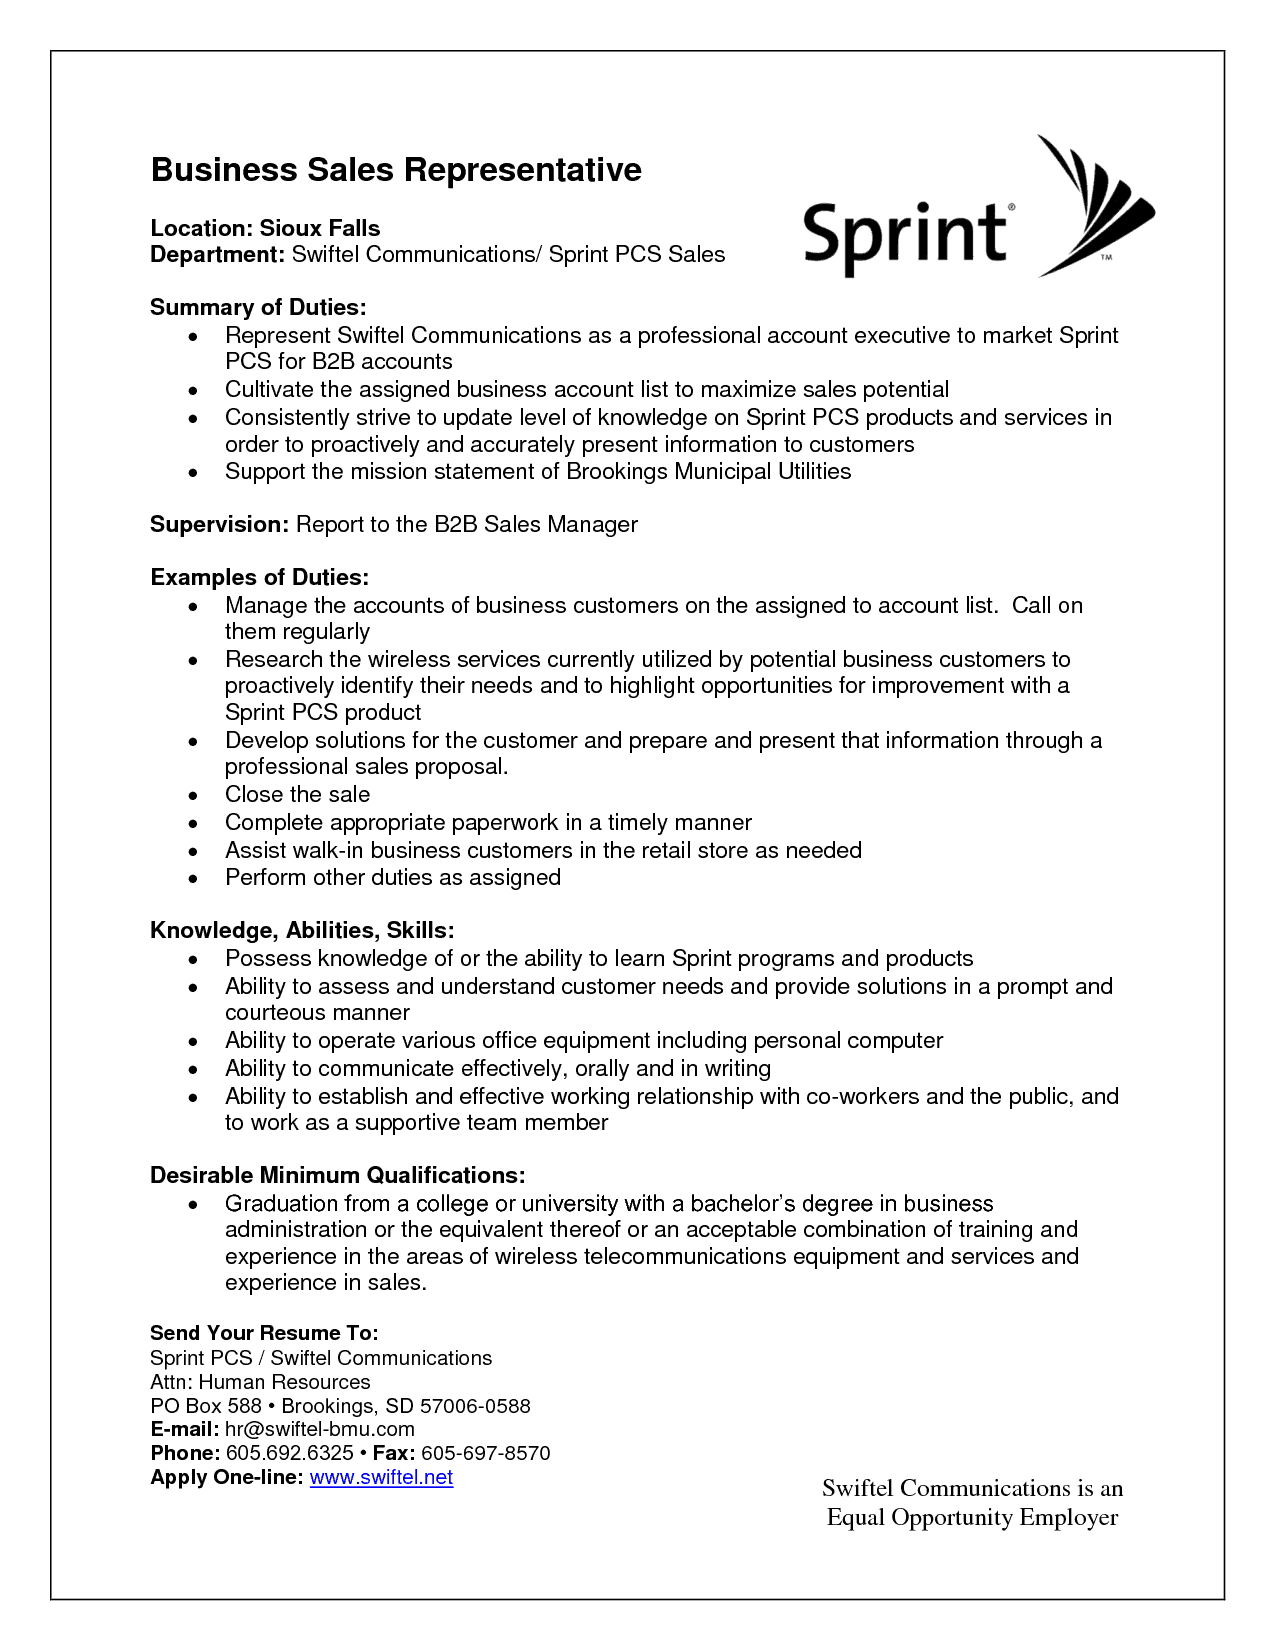 Proposal for new job position template